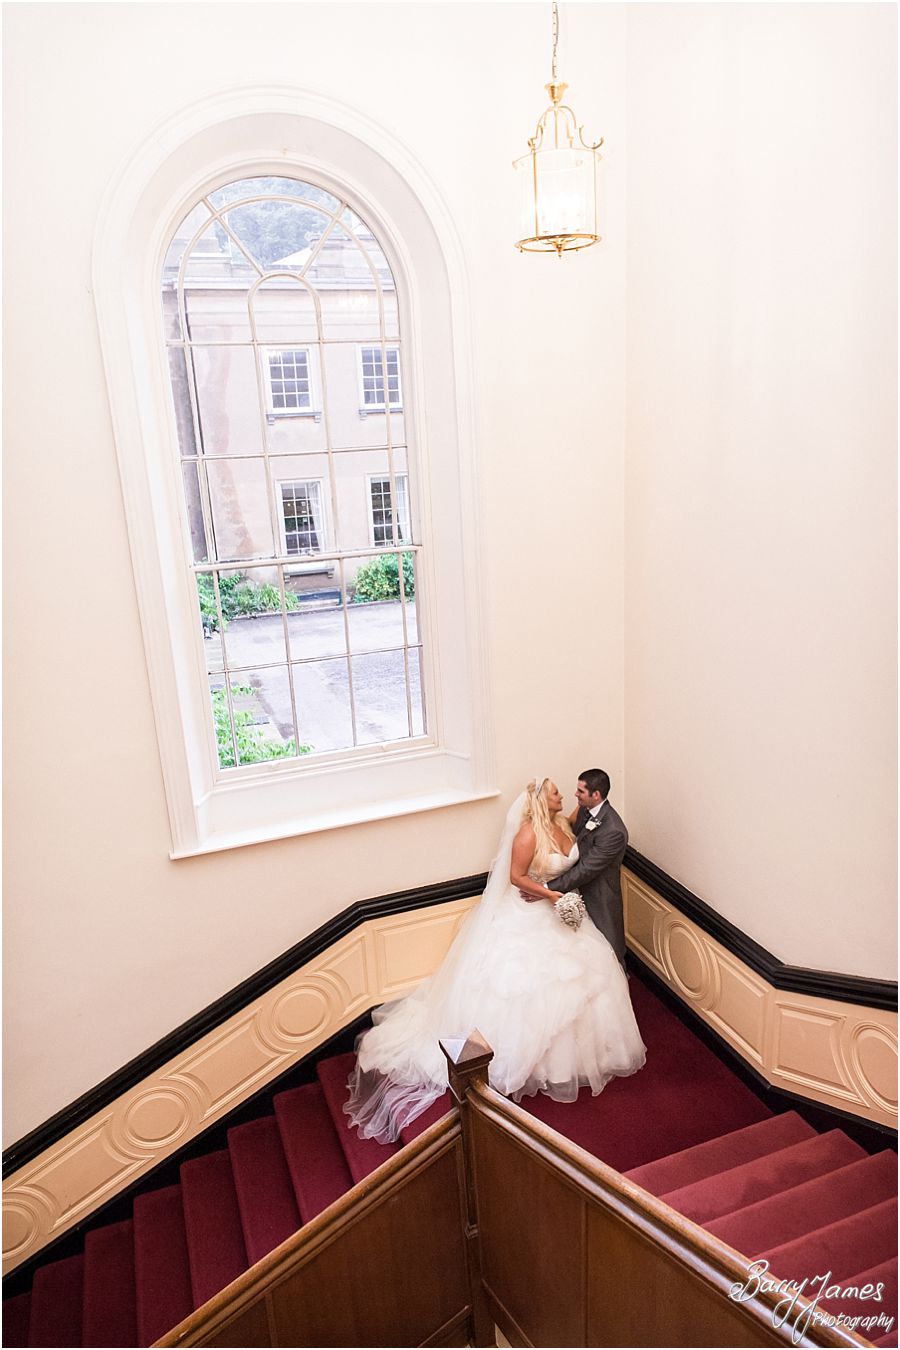 Utilising the stunning interior location for modern stunning wedding portraits at Himley Hall in Dudley by Dudley Wedding Photographer Barry James